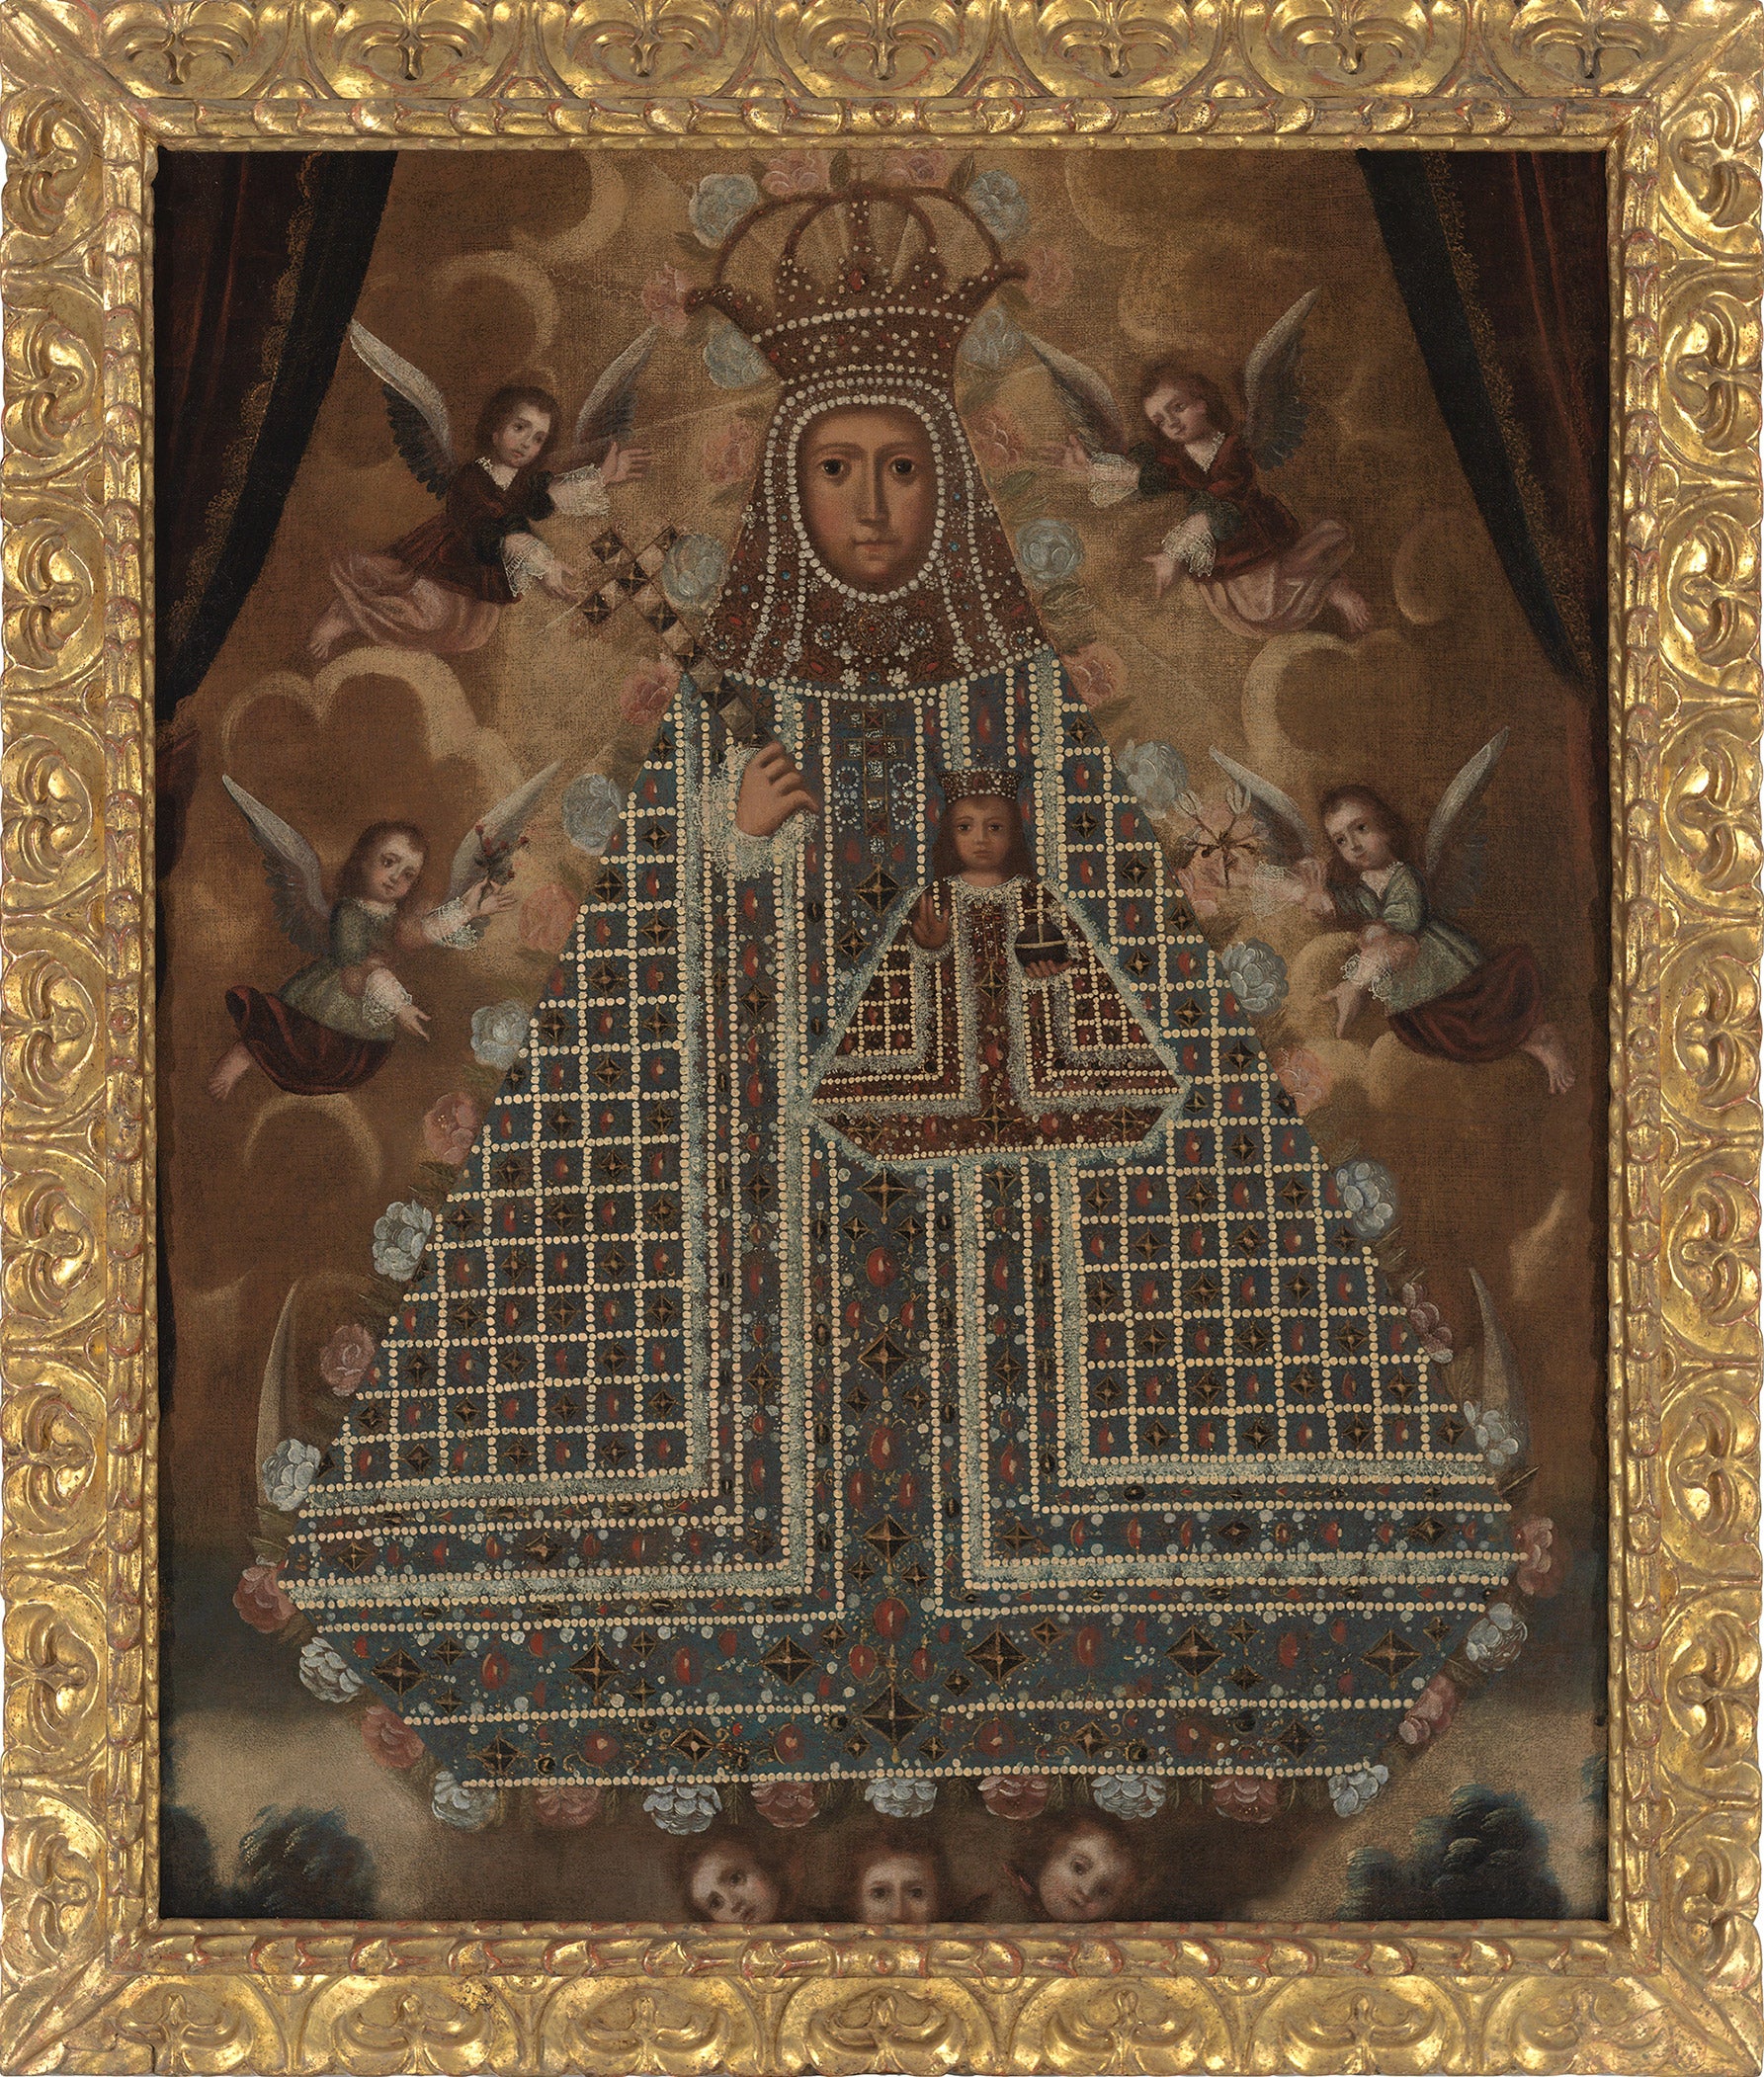 “Our Lady of Guadalupe at Extremadura” (1730–80) by Diego de Ocaña. Oil on canvas. Carl & Marilynn Thoma Collection.